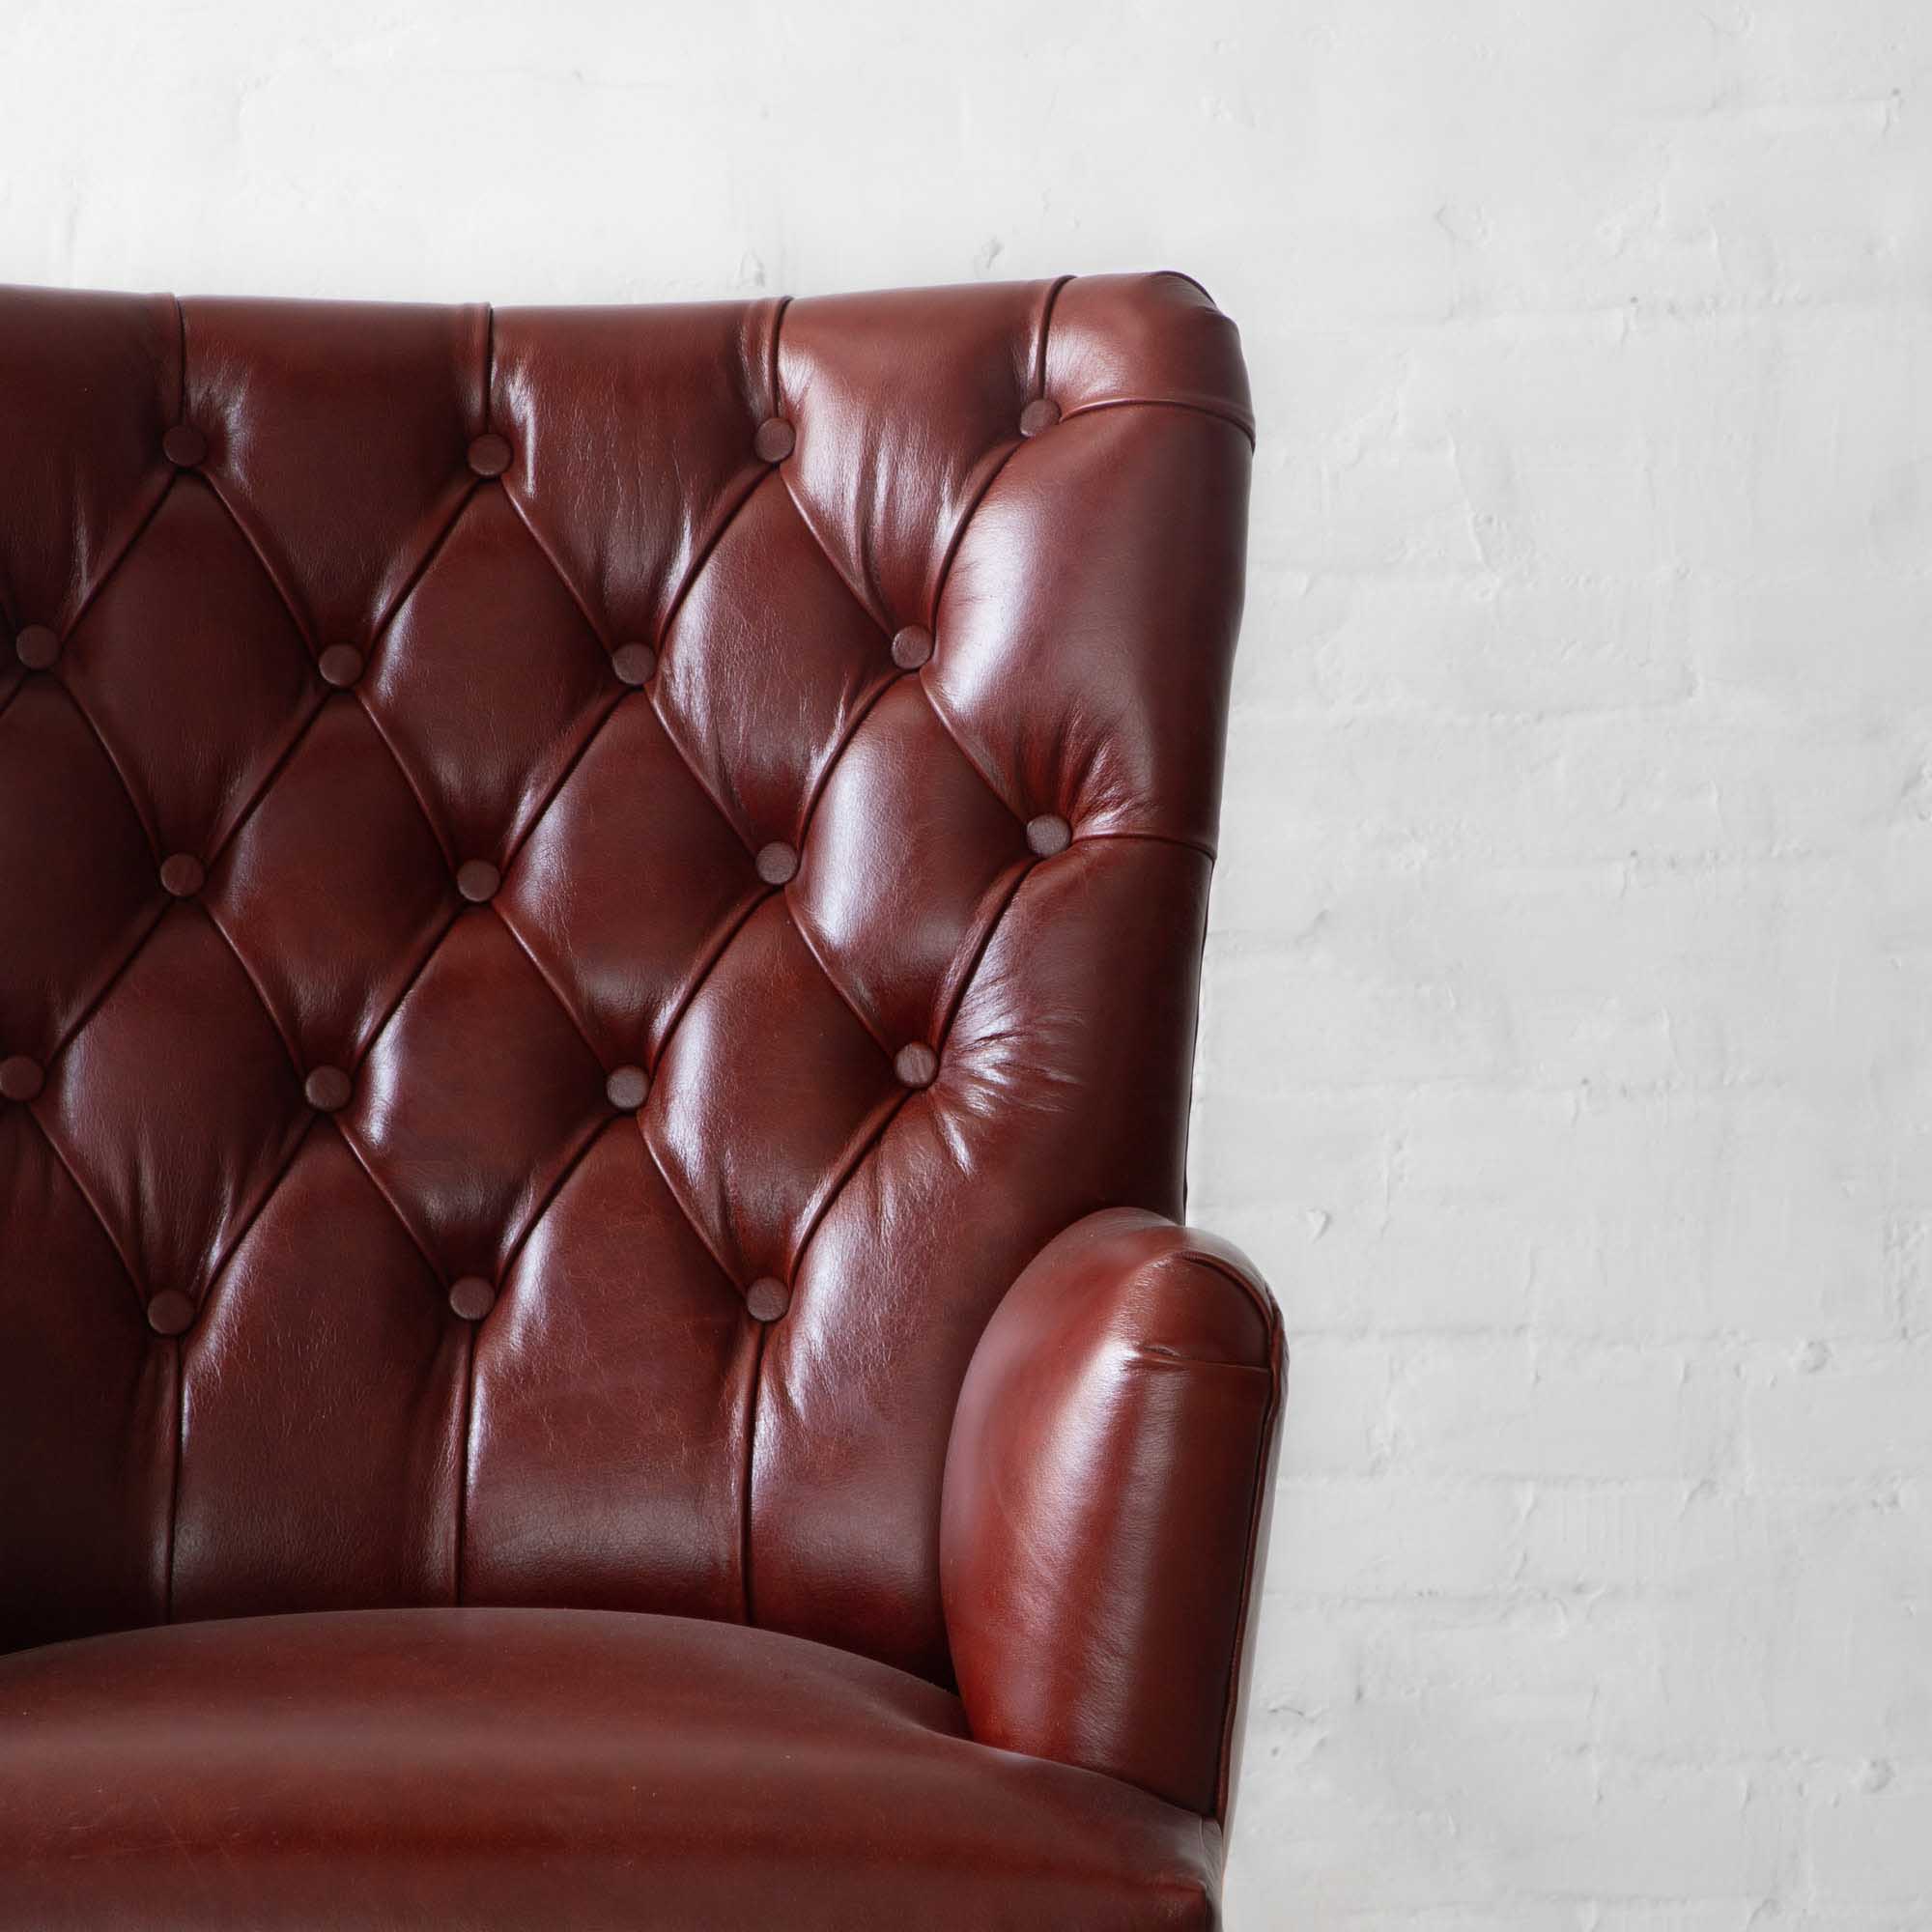 Melbourne Tufted Leather Armchair